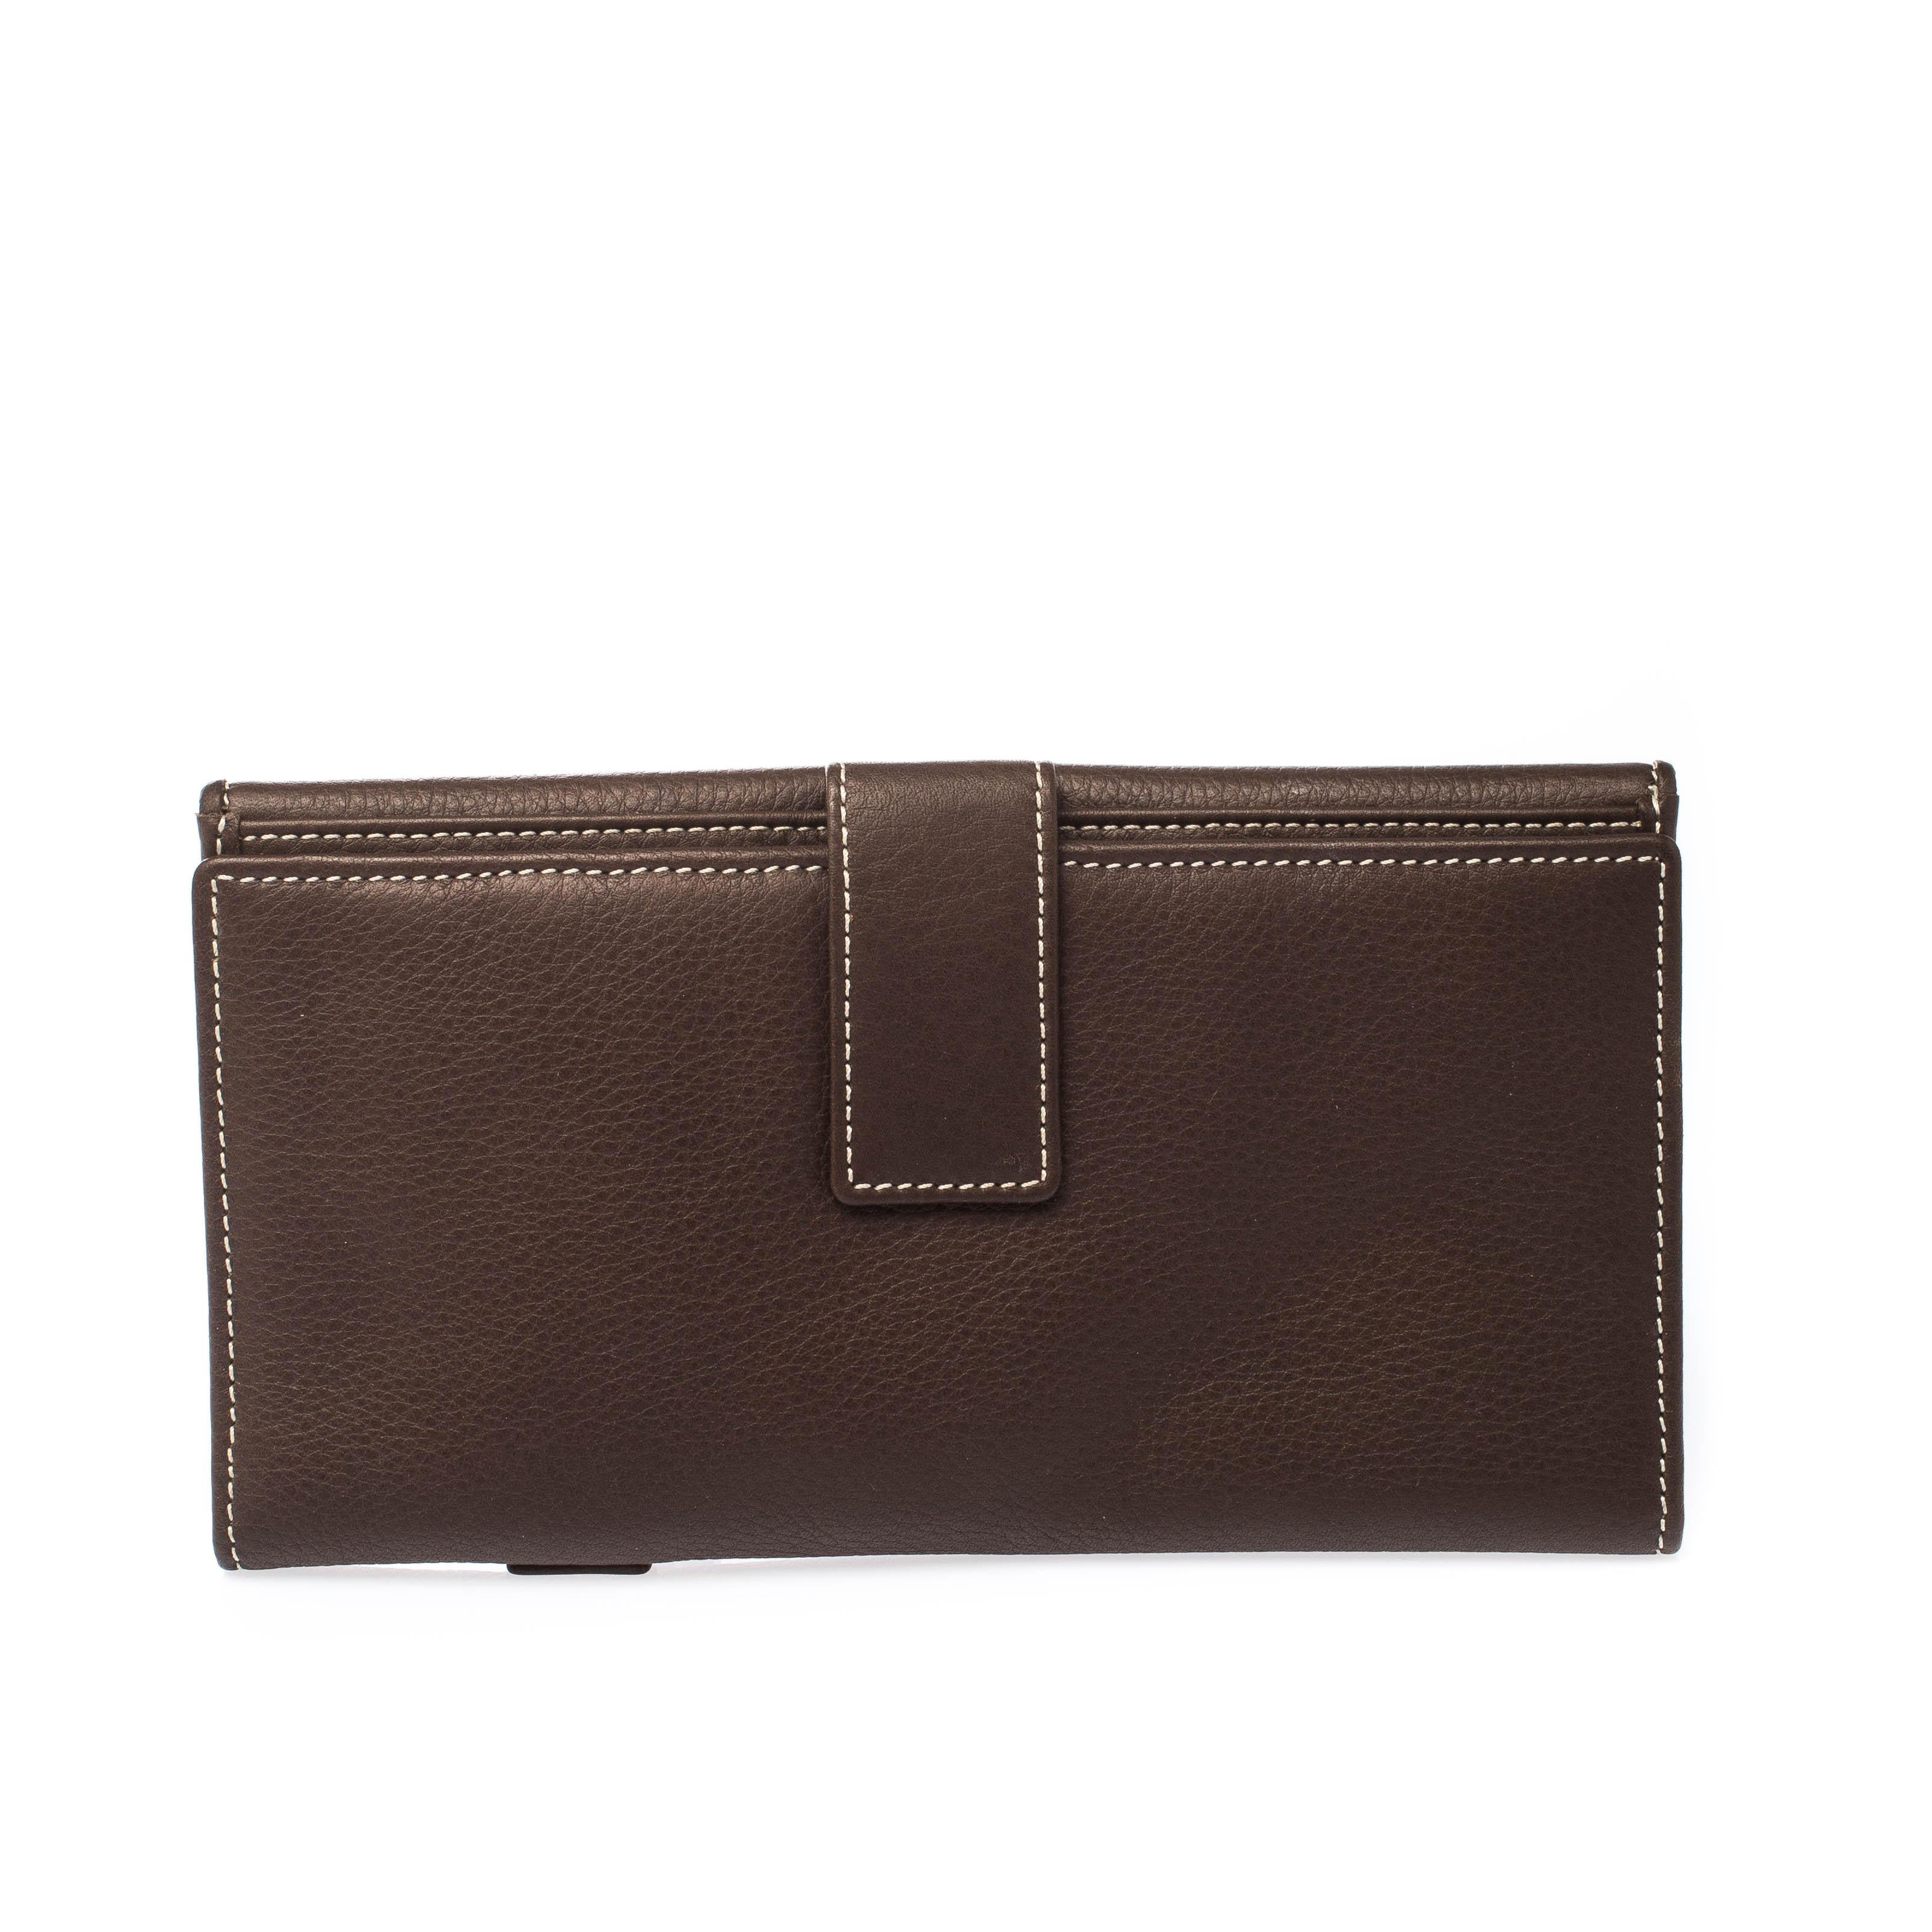 Take this spacious and functional wallet by Dior everywhere. Crafted from leather, this front flap wallet is accented with a gold-tone D. The easy to organize interior features open compartments and card slots.

